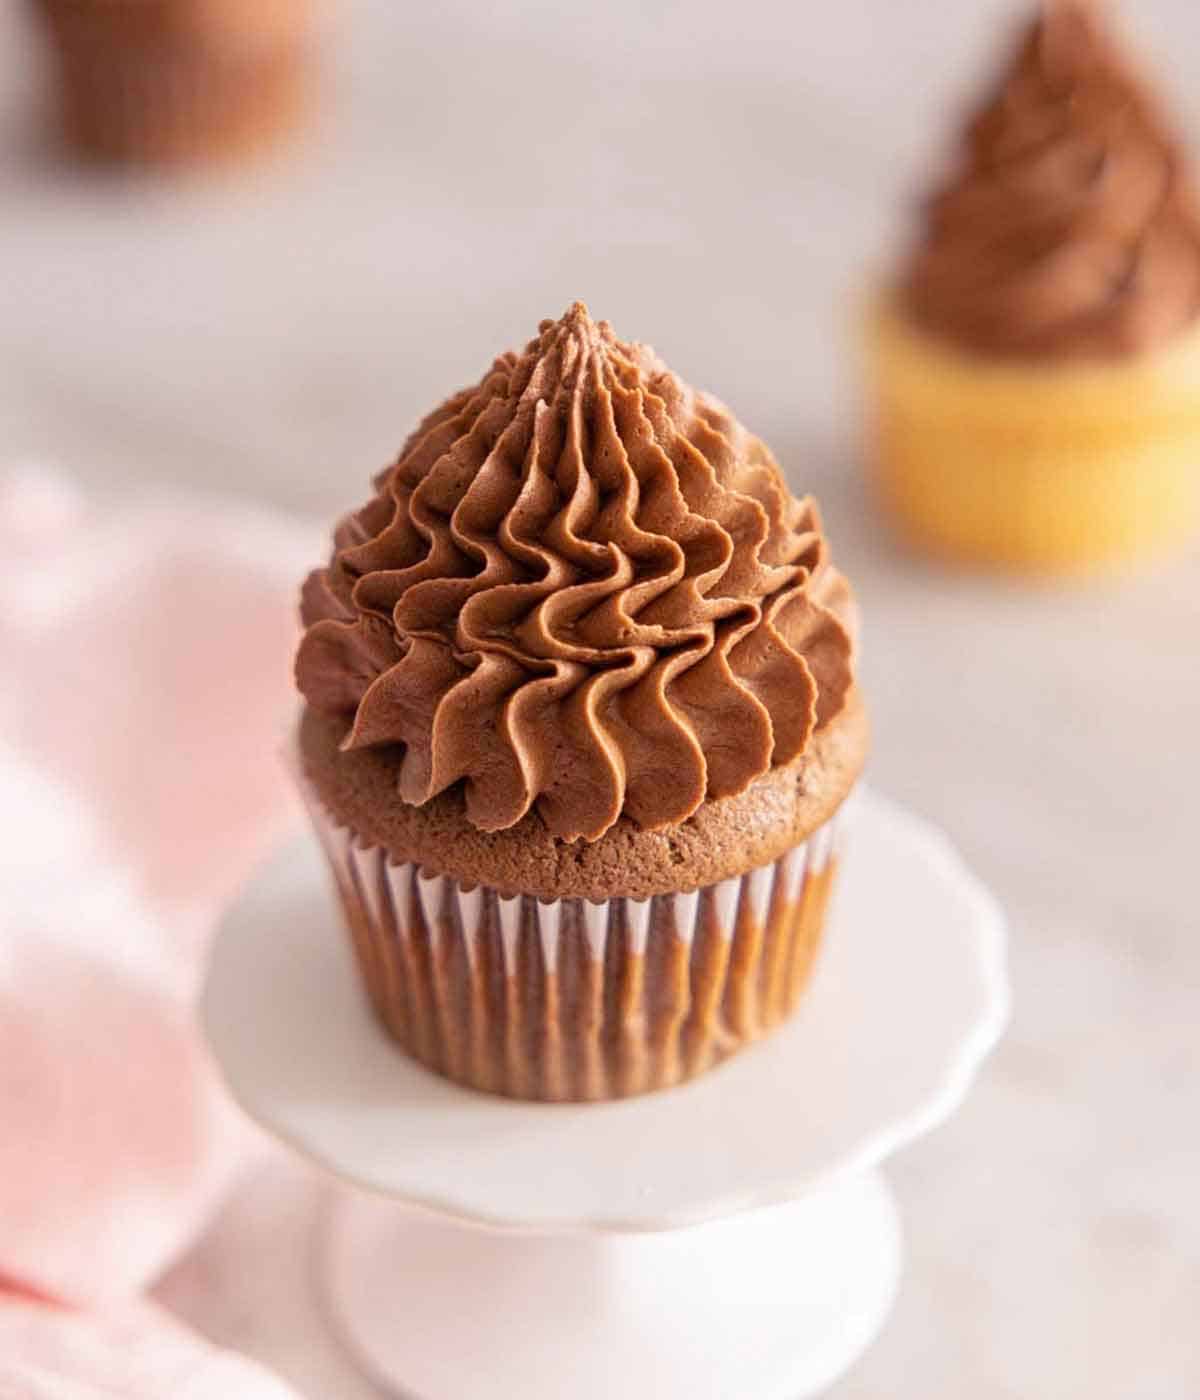 A cupcake with chocolate buttercream frosting on top, on a mini cake stand.